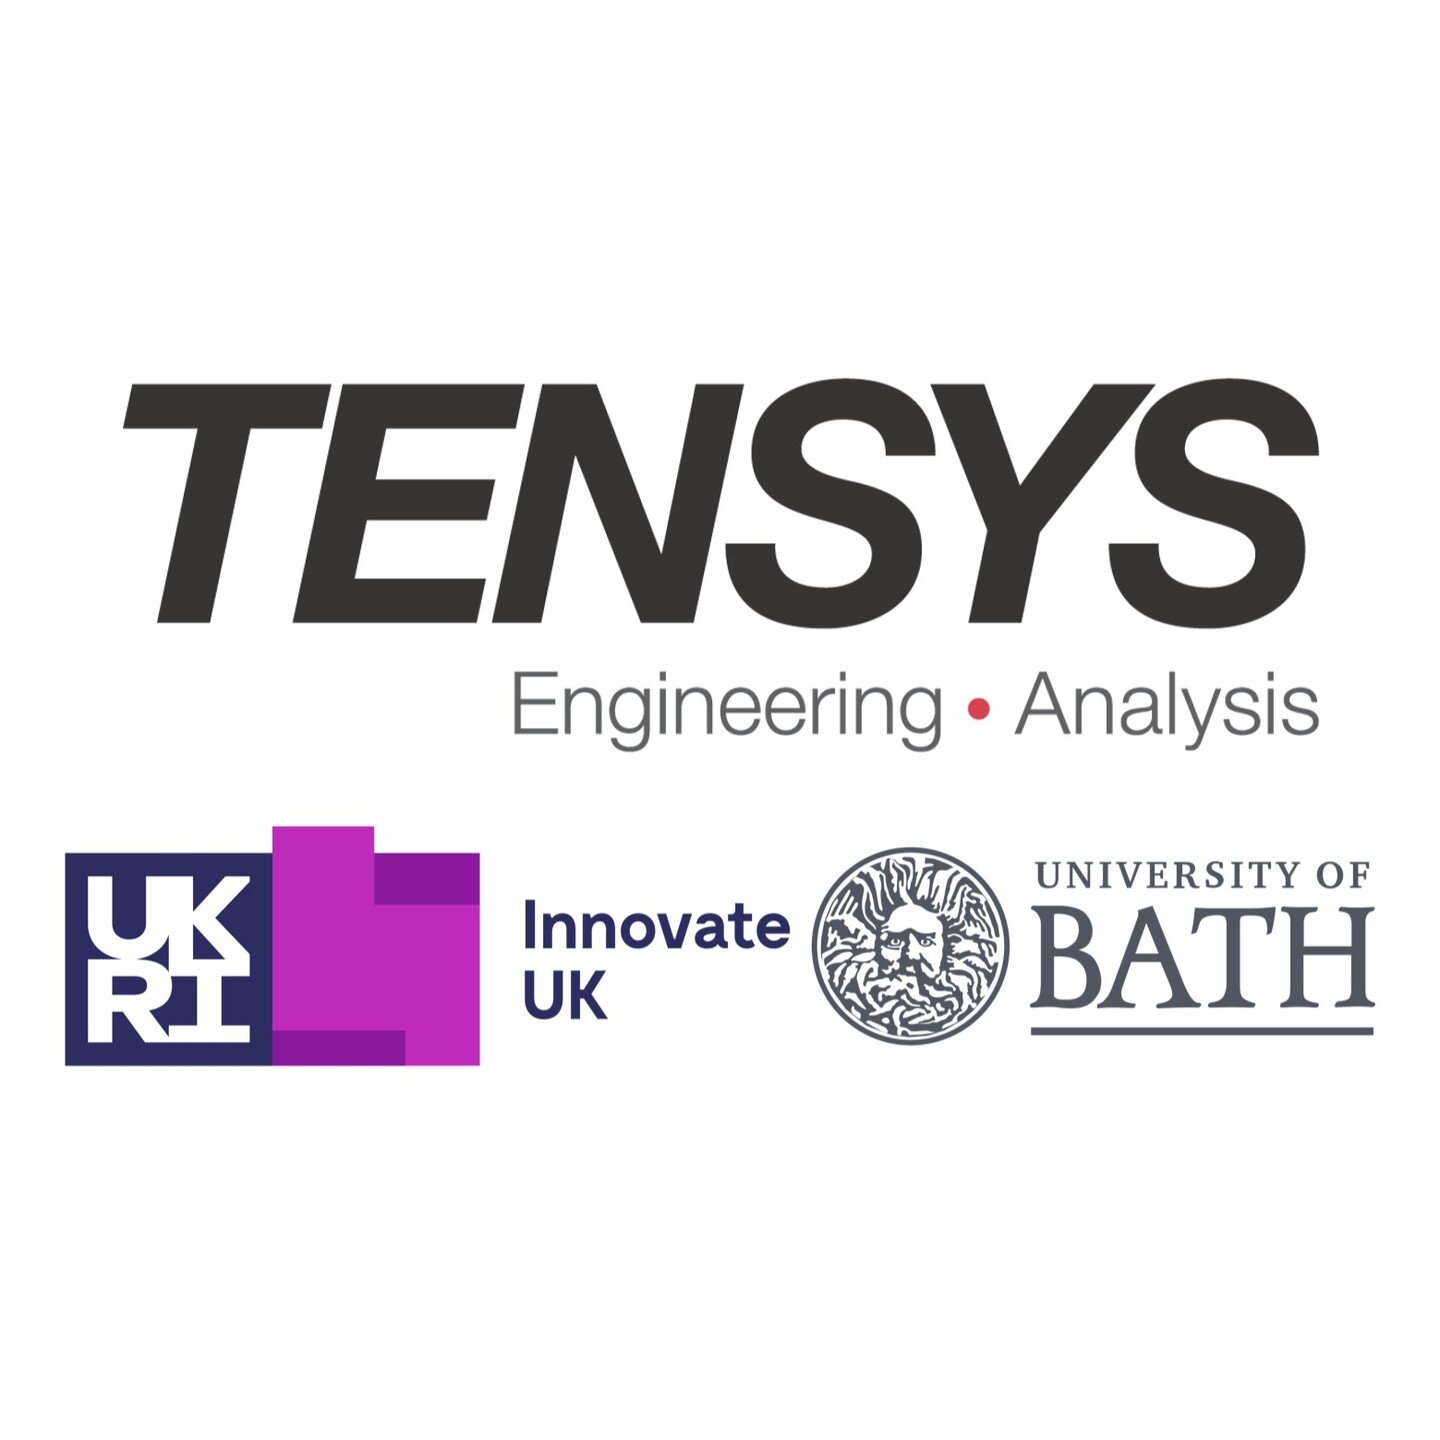 Tensys have some exciting news to share!

We are pleased to announce the successful award of an @weareinnovateuk Knowledge Transfer Partnership grant, partnering with the @uniofbath , to enhance the Tensys in-house software suite, inTENS.
 
Working f